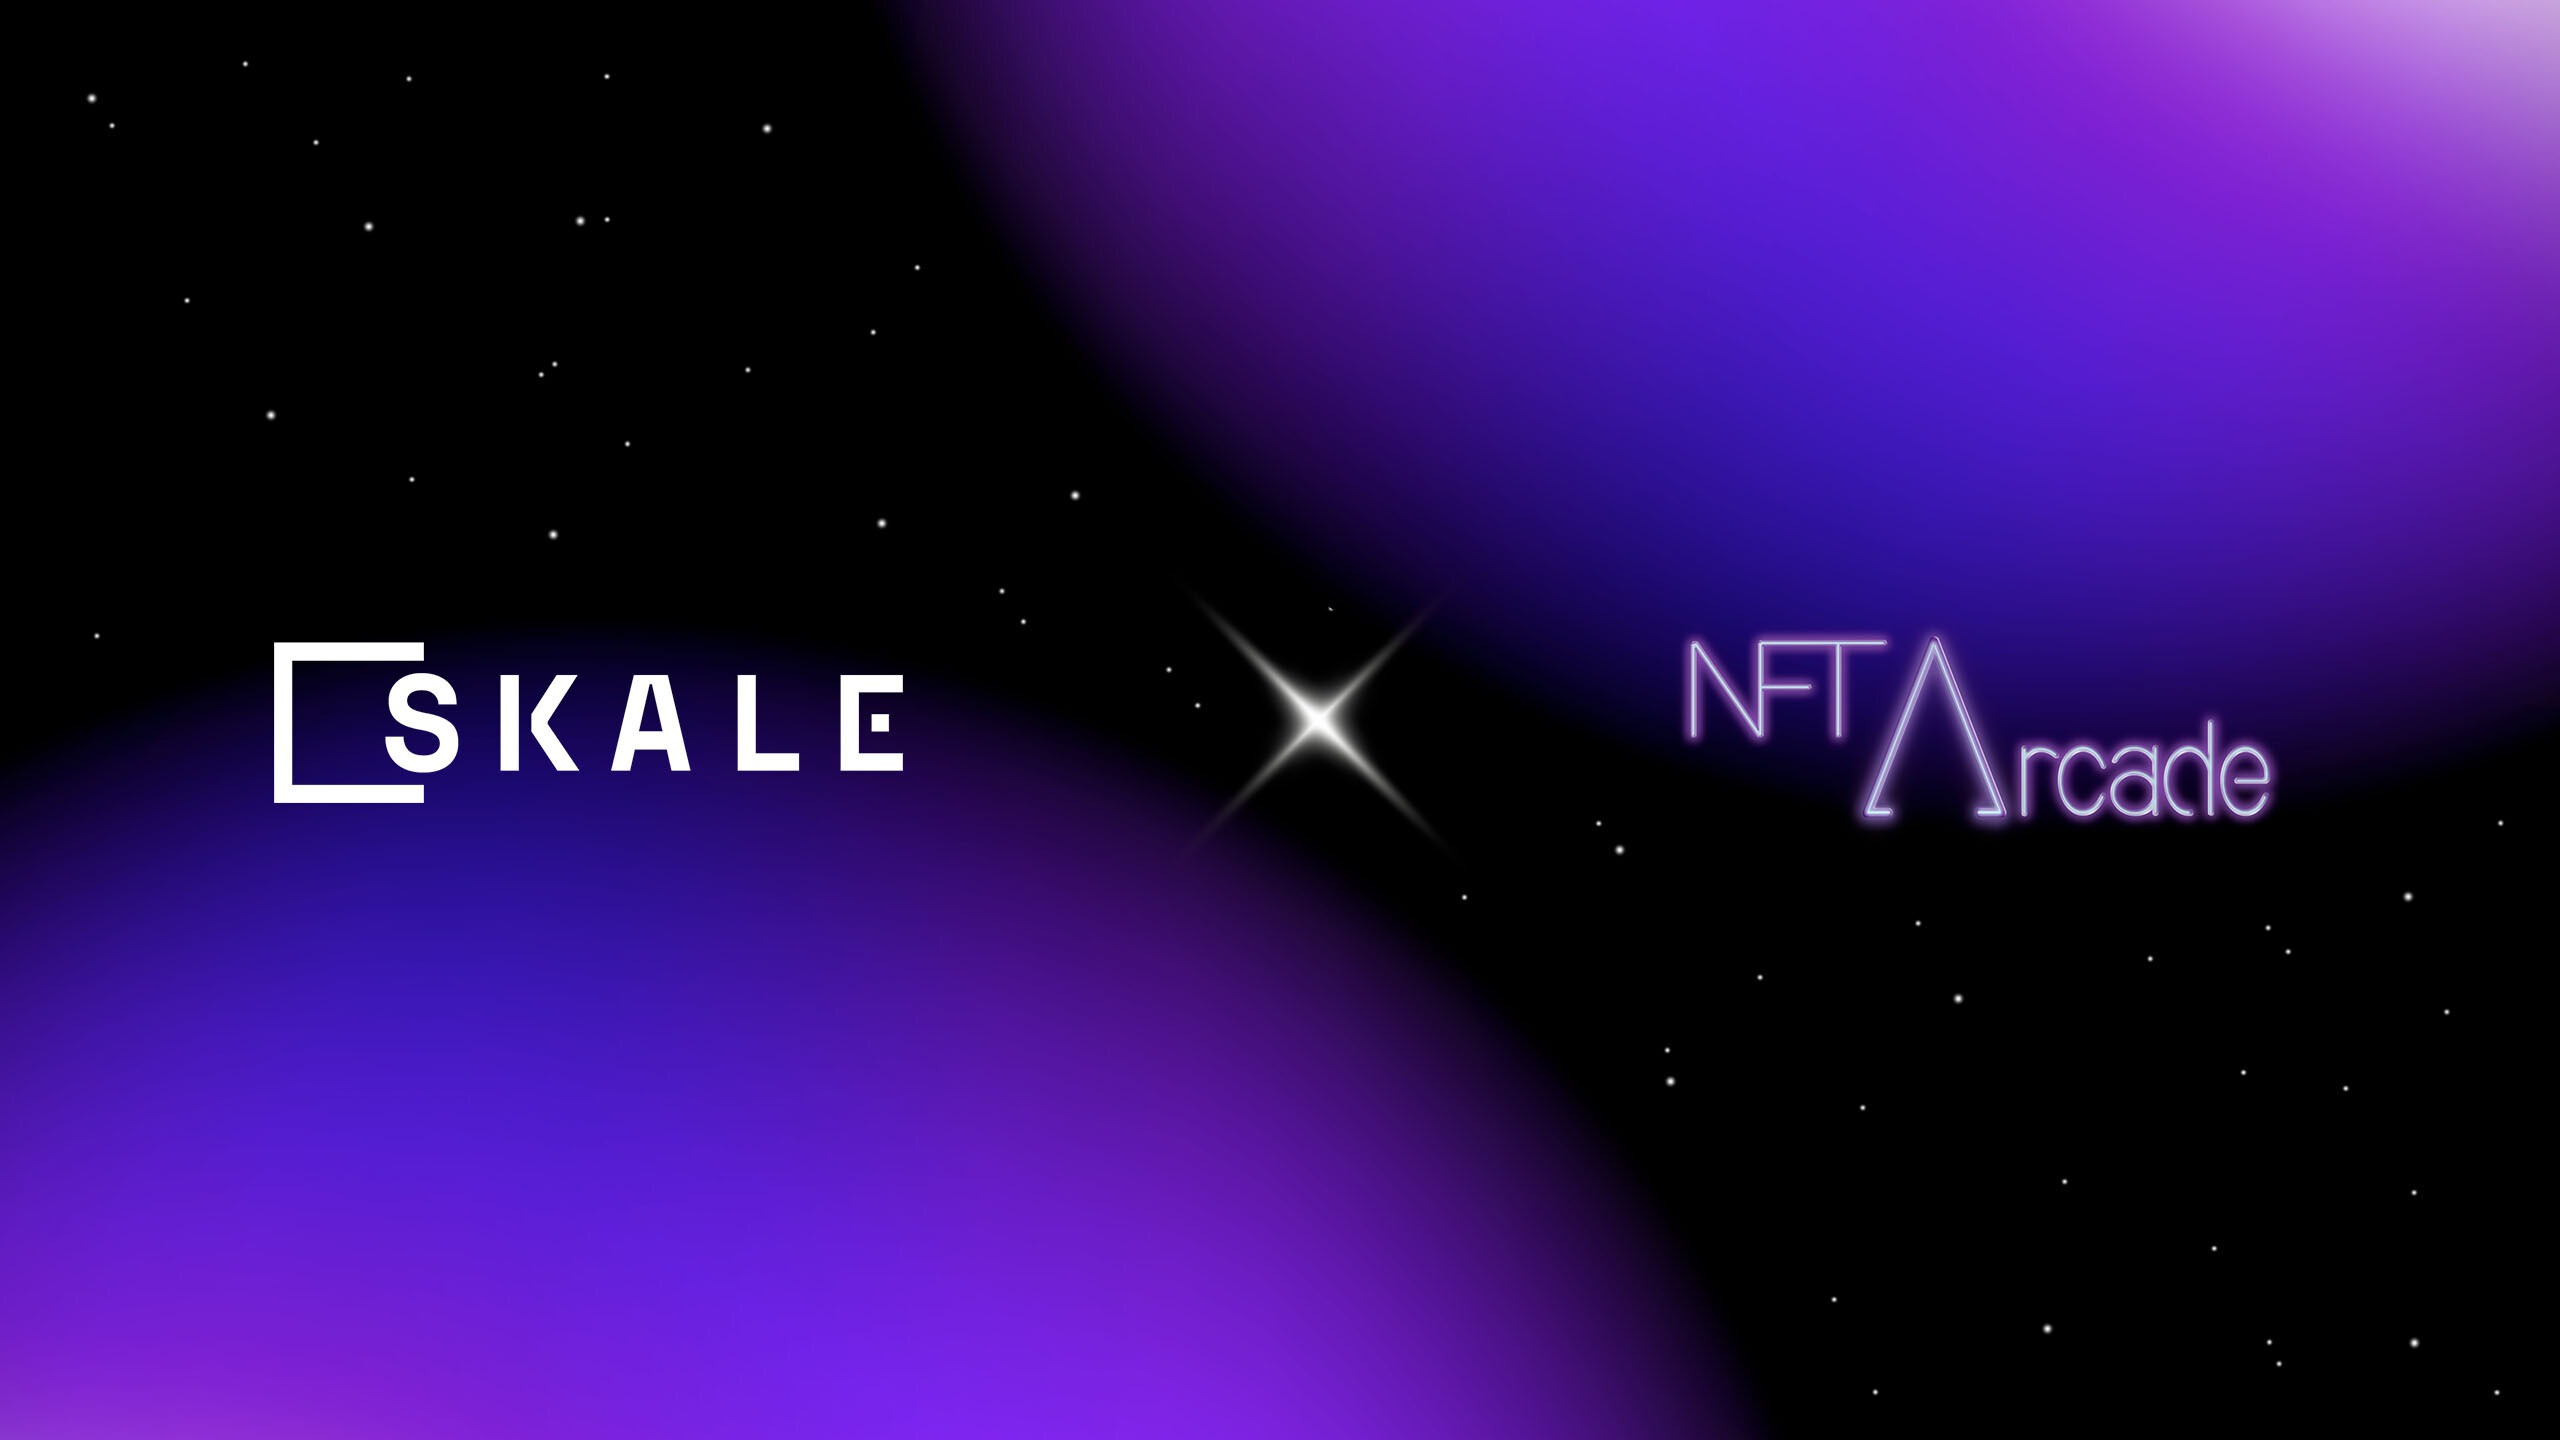 CRYPTONEWSBYTES.COM NFT-Arcade-and-SKALE-Network-Form-Partnership-to-Enhance-Security-and-Accessibility-in-the-NFT-Marketplace NFT Arcade and SKALE Network Form Partnership to Enhance Security and Accessibility in the NFT Marketplace  